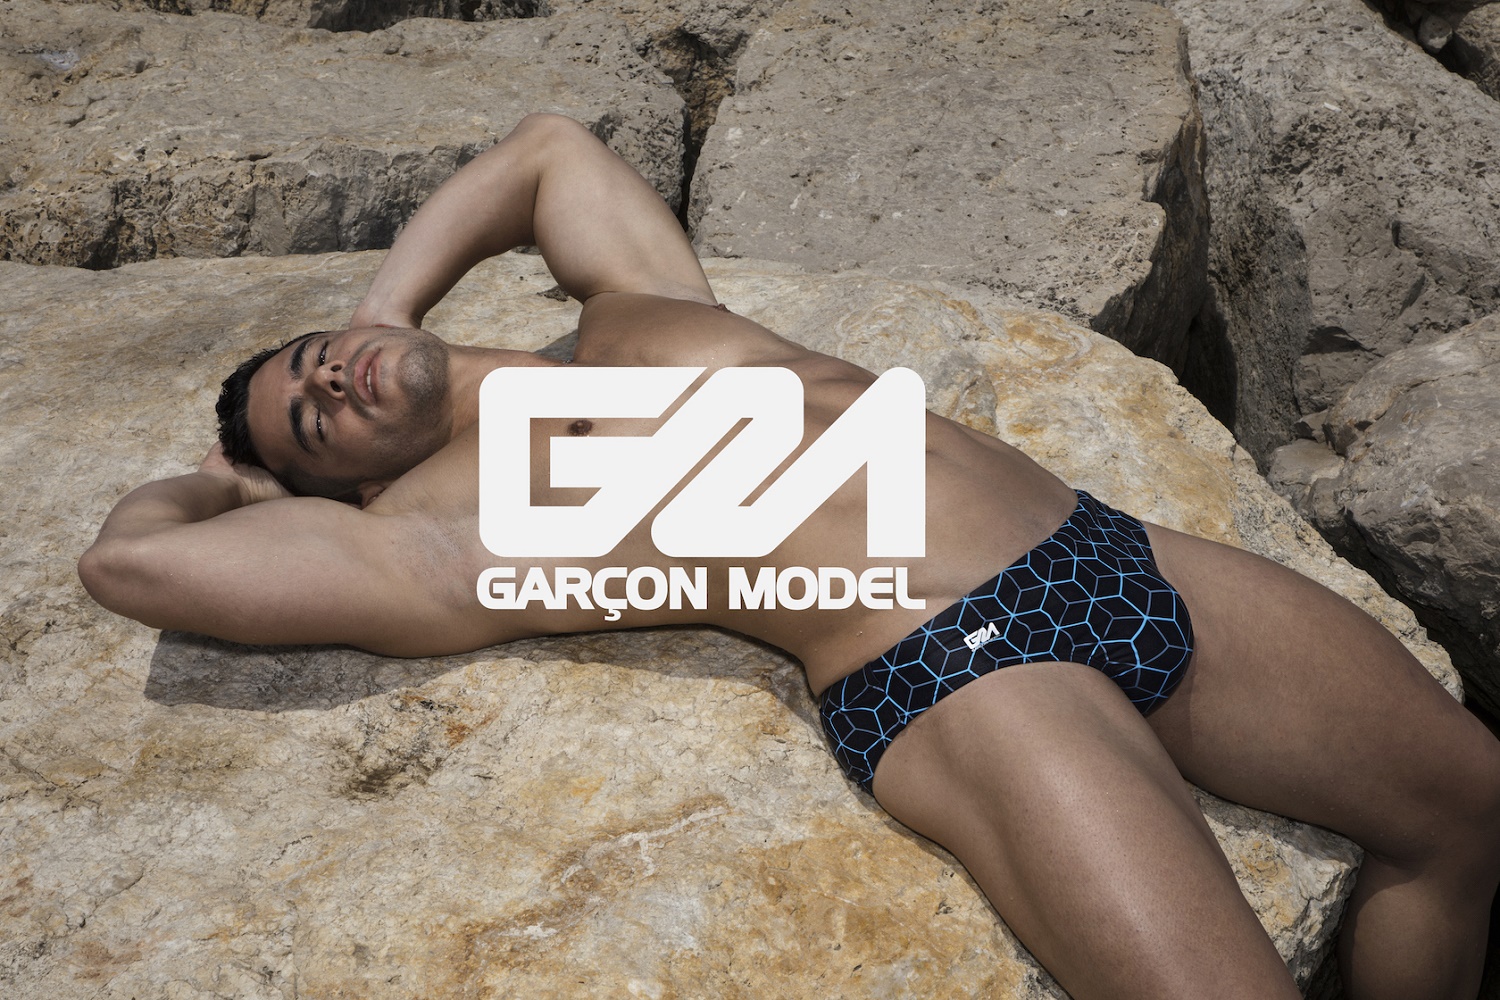 Garcon Model's latest campaign has left us sweating profusely - Attitude